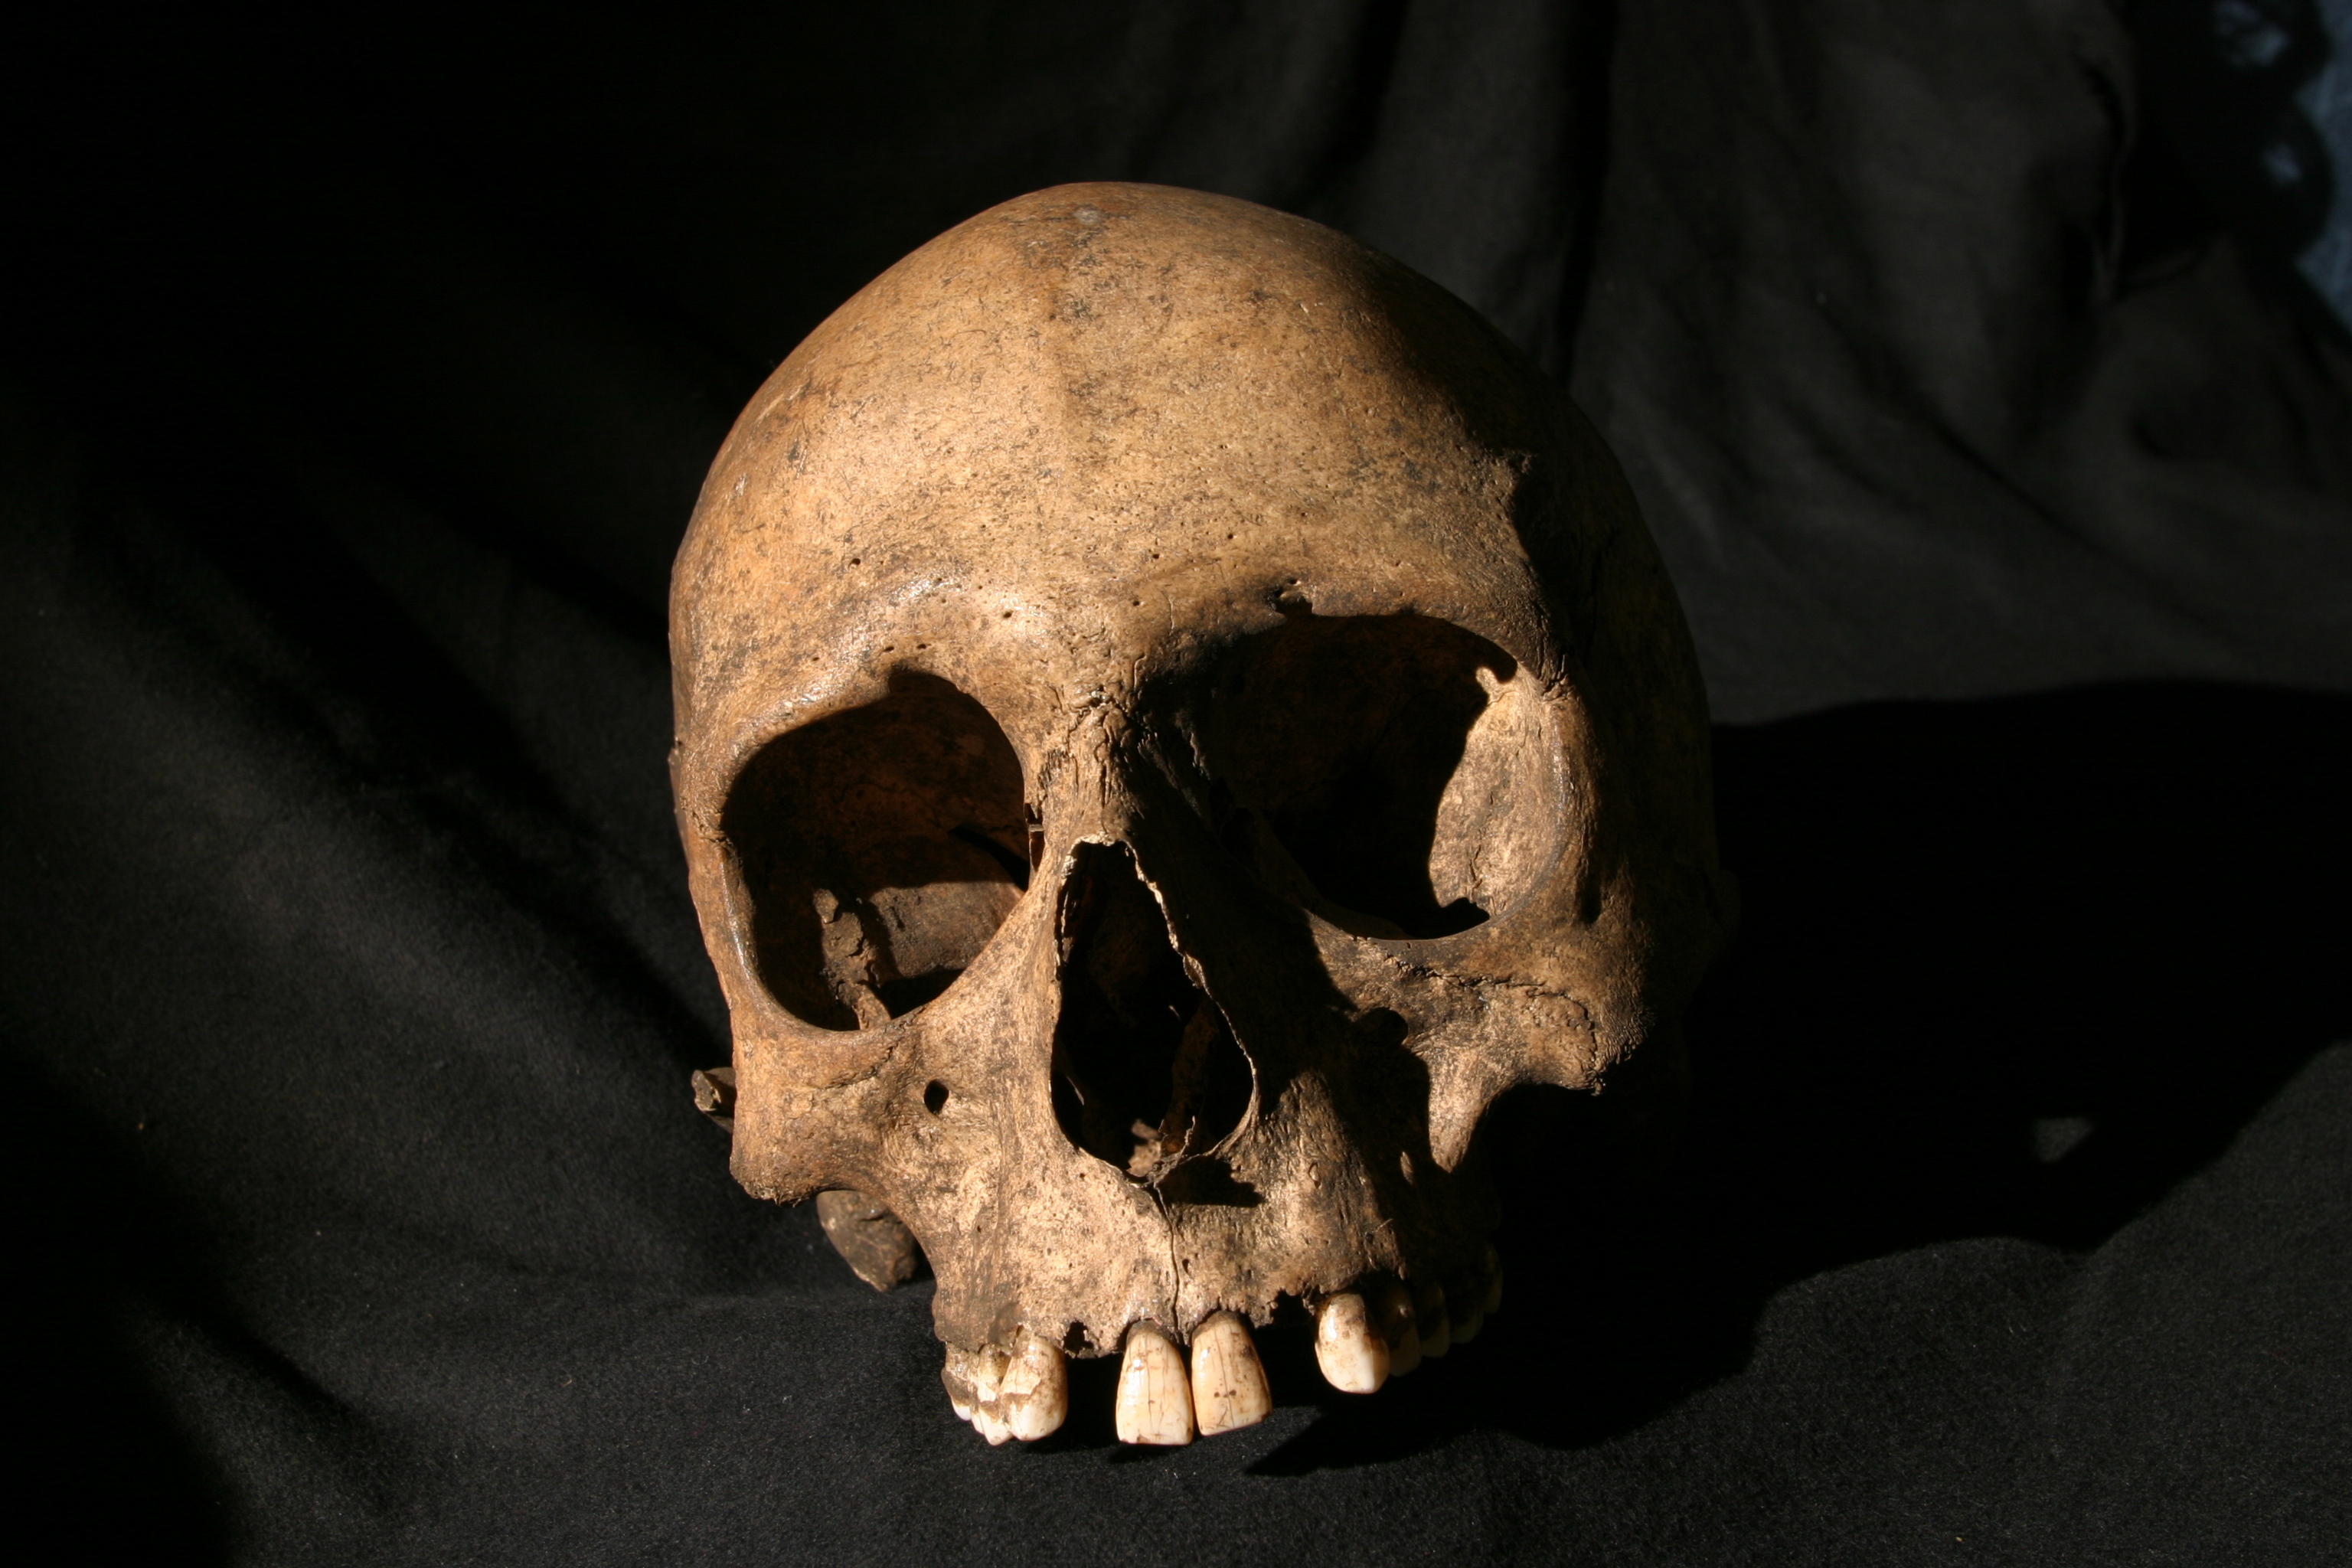 A skull is highlighted against a dark background.